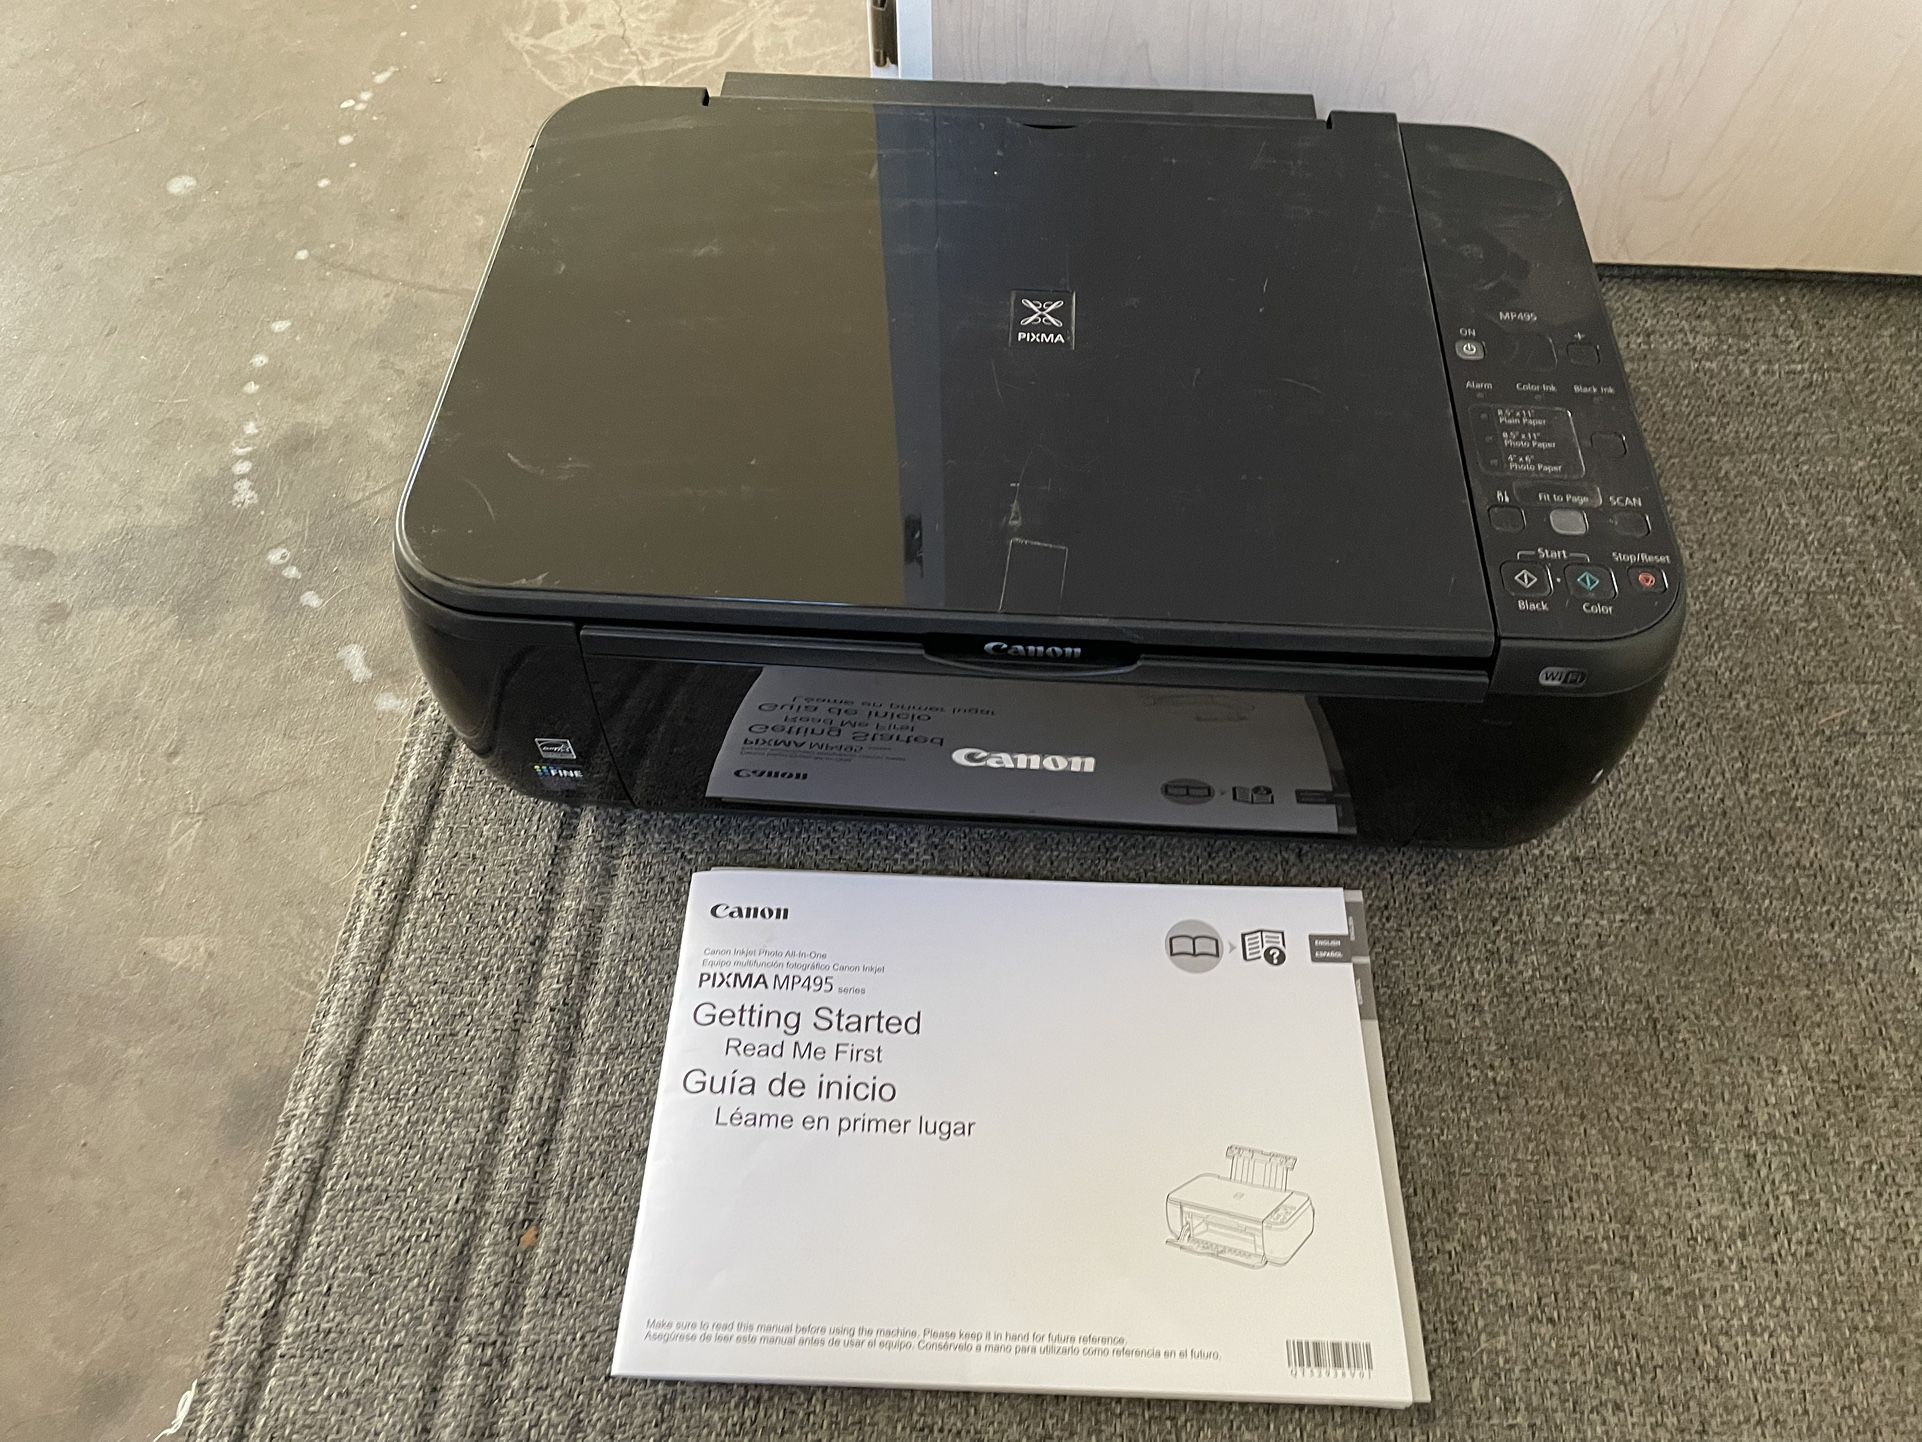 Canon pixma Mp495 All In One Printer Sale in Chandler, AZ - OfferUp